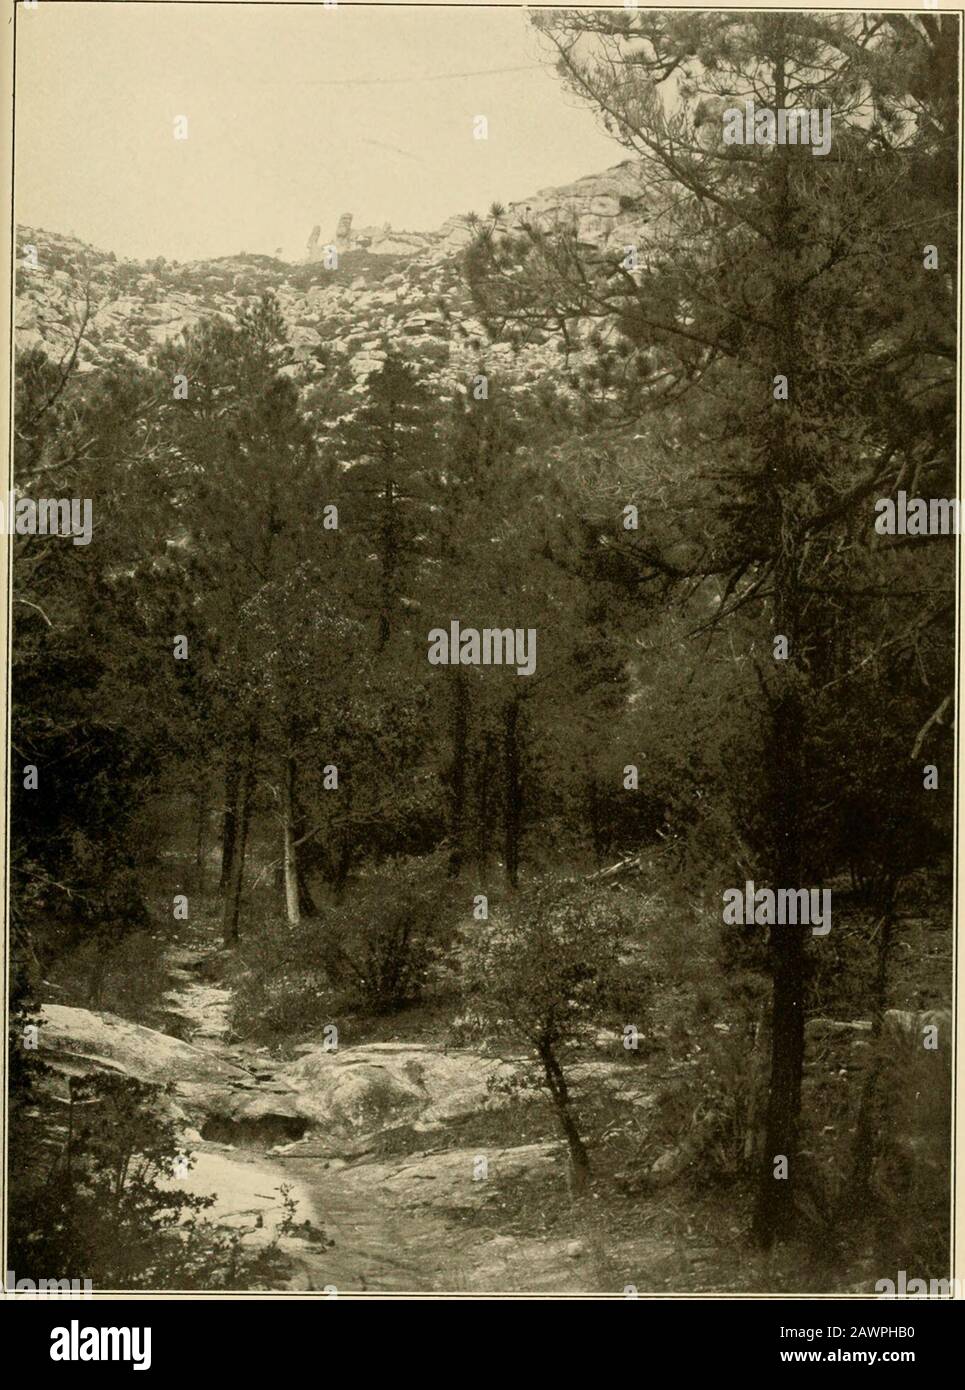 The vegetation of a desert mountain range as conditioned by climatic factors . B. Strcamway in Bear Canon at 6,000 feet, with Pinus arizonica, Juglans rupestris, and Vitis arizonica. SHREVE Plate 21. Open stand of Finns a onica, Finus chihuahuana, and Juniperus pacftyphlwa near floor of Bear Canon at G,100feet. In background are rocky slopes of north wall of Bear Canon. SHREVE Plate 22 Stock Photo